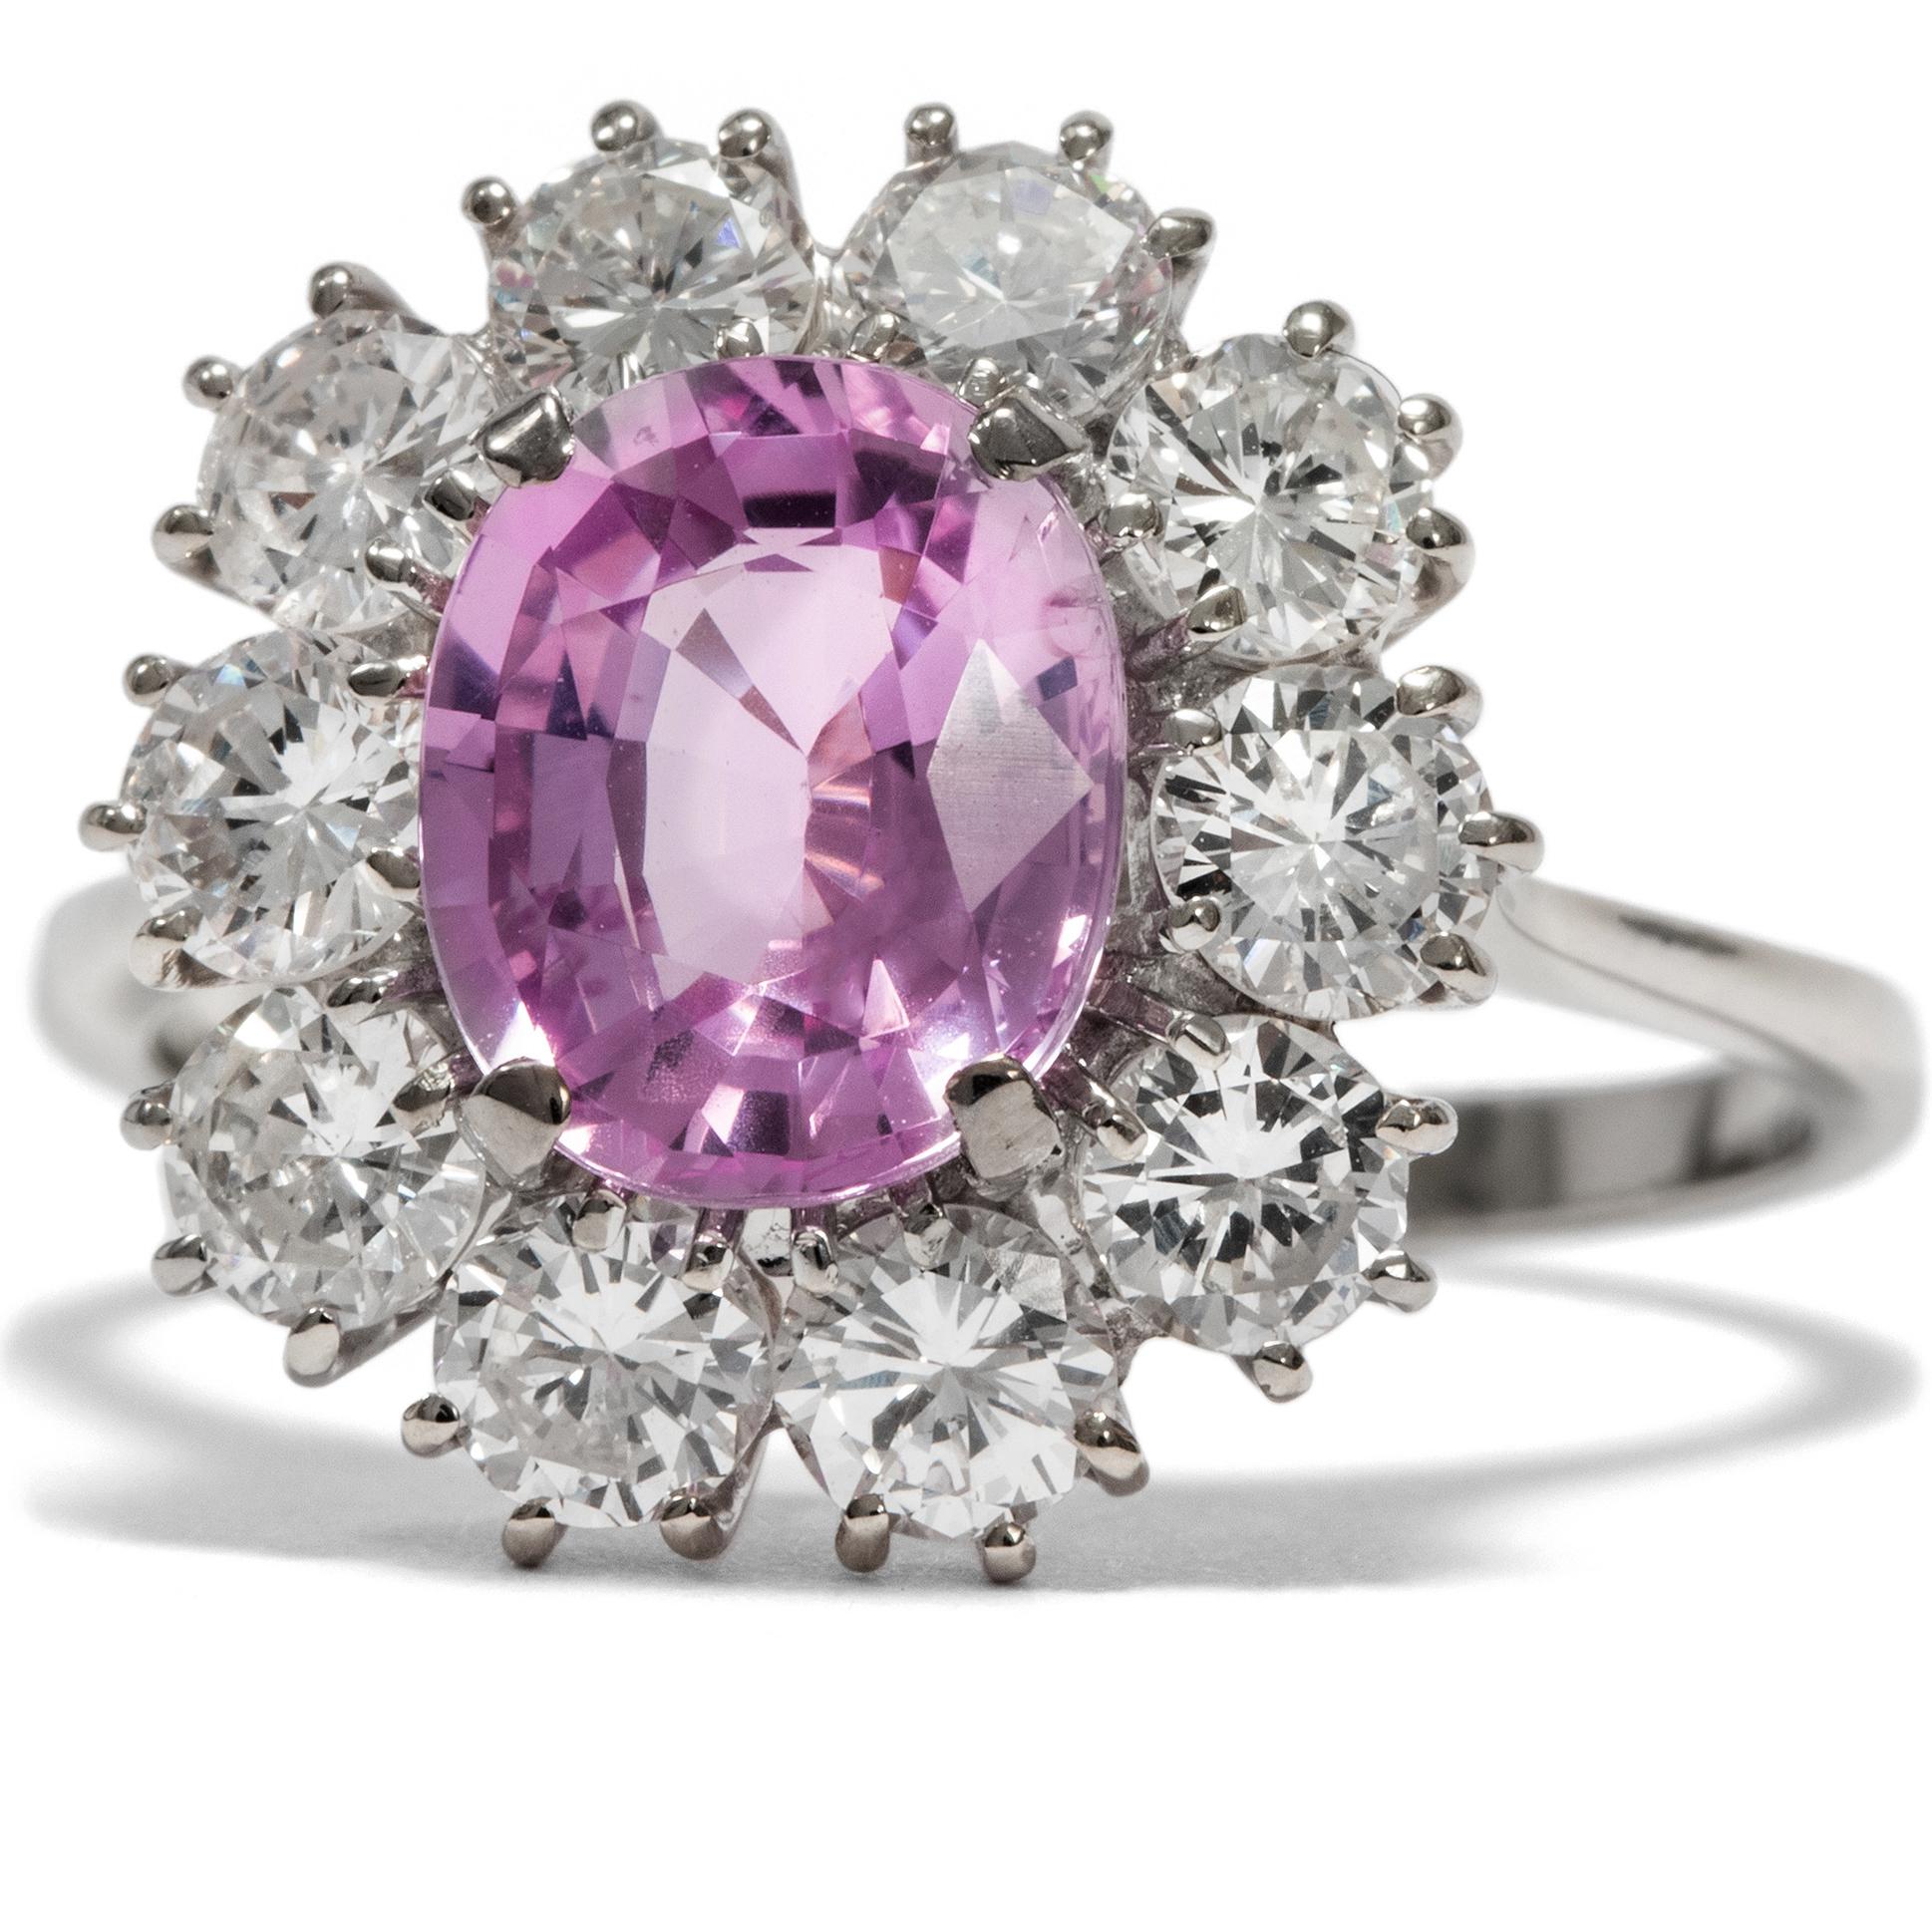 Retro Vintage circa 1970 Certified No Heat 2.81 Carat Pink Sapphire Cluster Ring For Sale